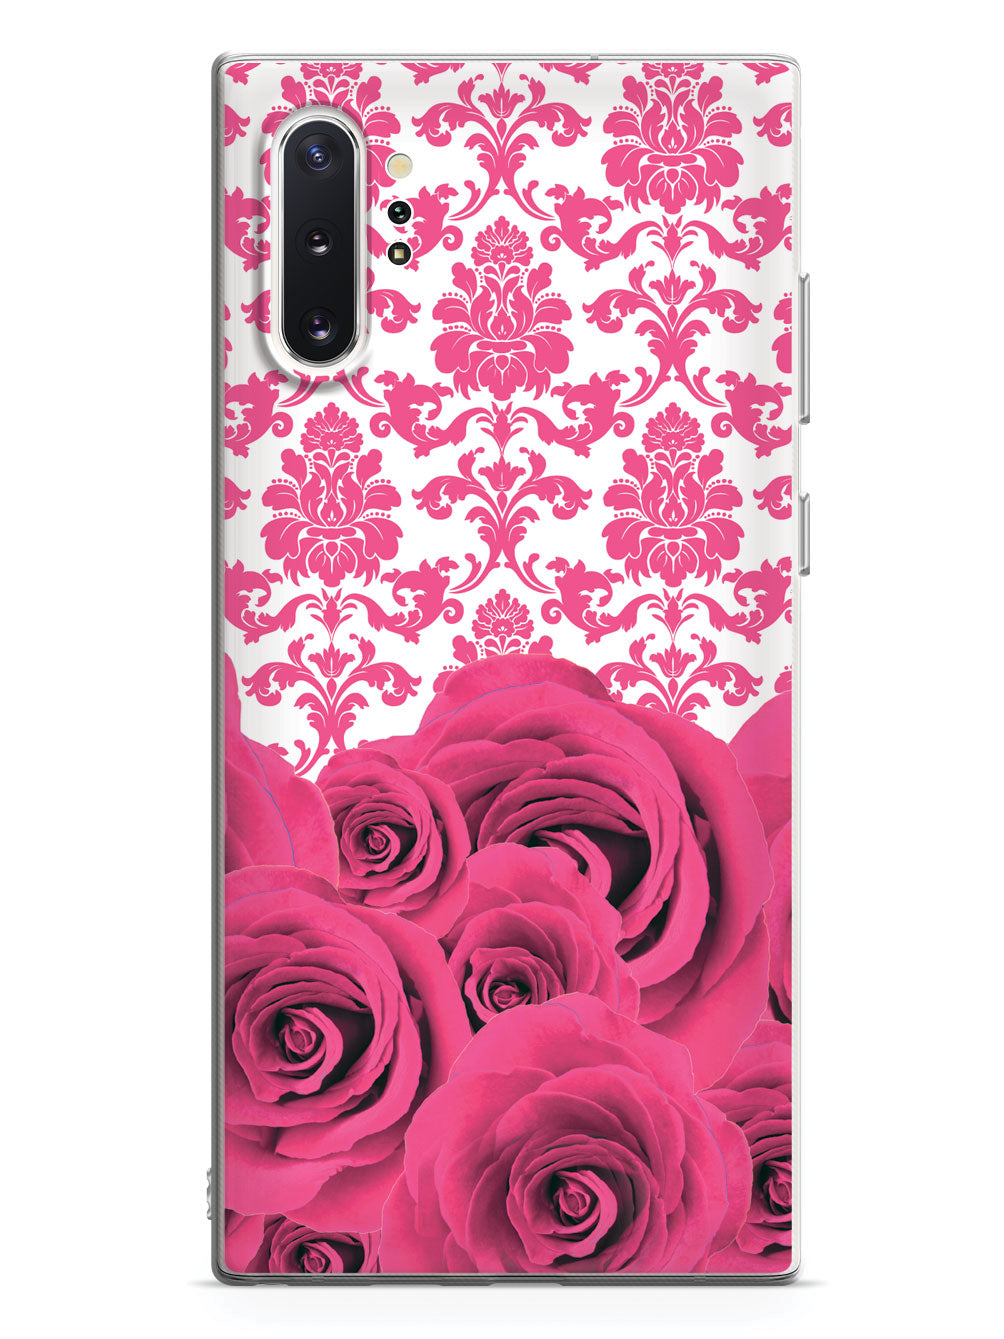 Damask and Roses - Pink Case